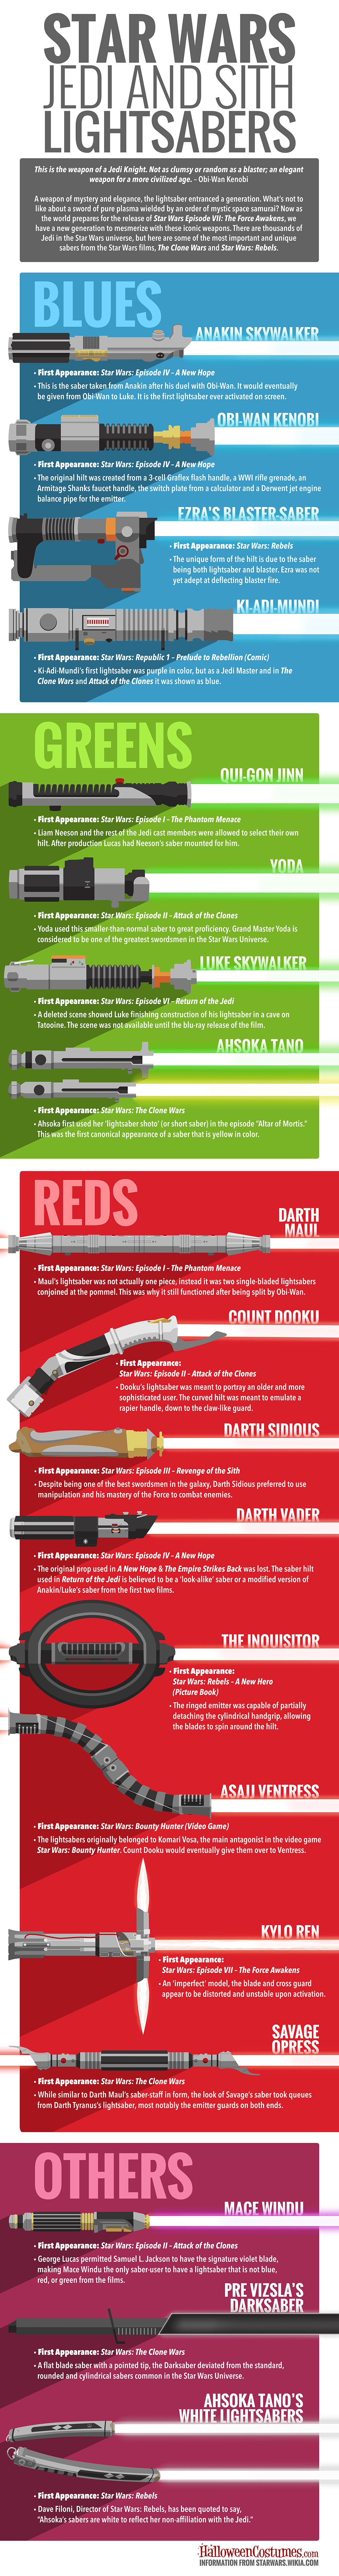  Star Wars Lightsabers Infographic